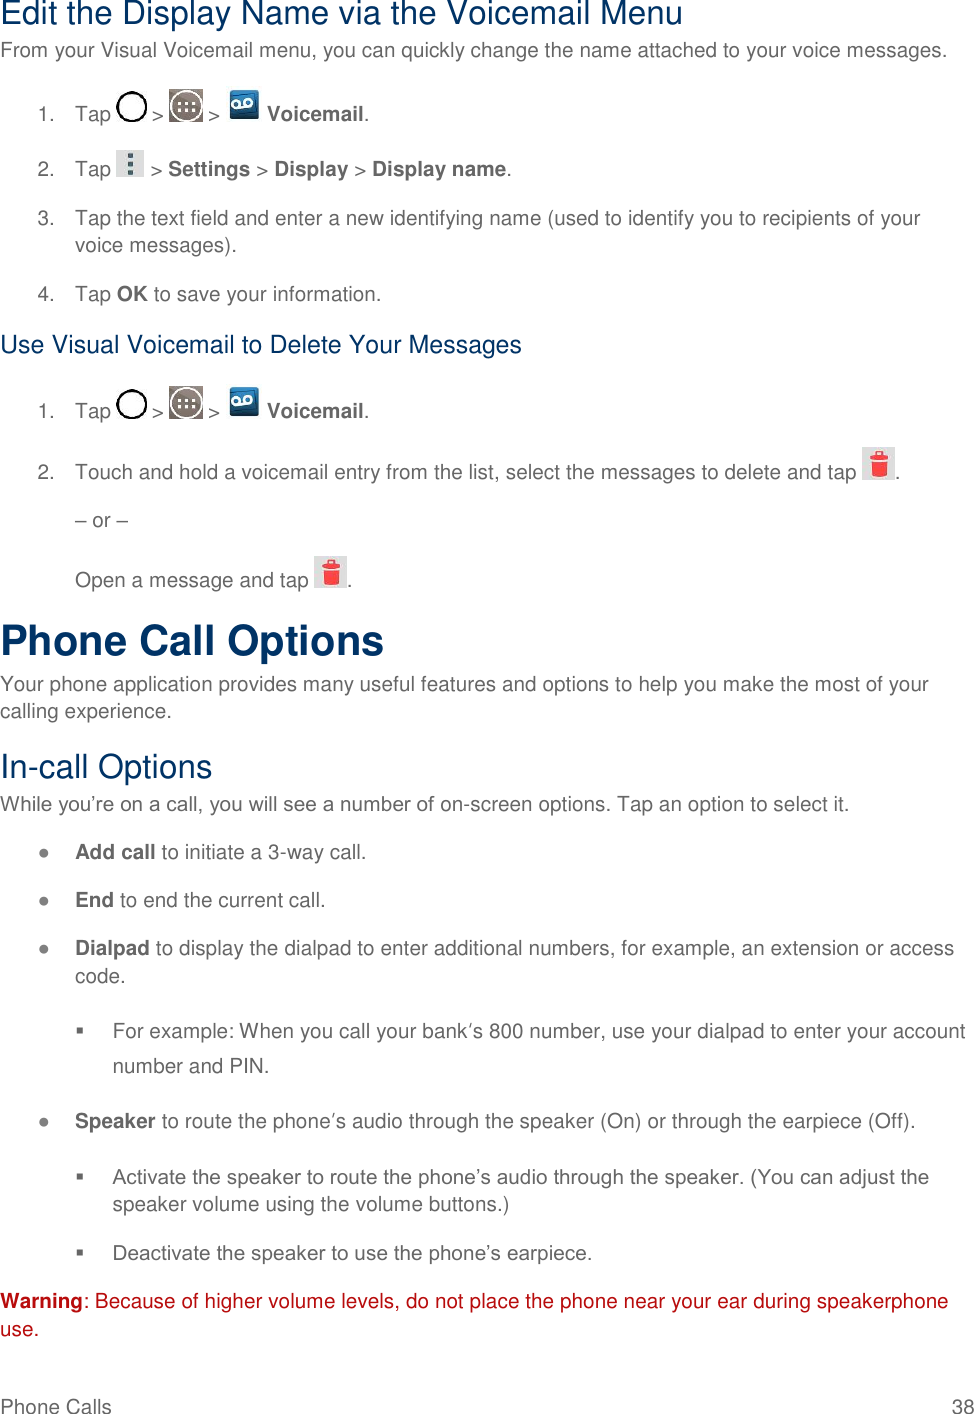 Phone Calls  38 Edit the Display Name via the Voicemail Menu From your Visual Voicemail menu, you can quickly change the name attached to your voice messages. 1.  Tap   &gt;   &gt;   Voicemail. 2.  Tap   &gt; Settings &gt; Display &gt; Display name. 3.  Tap the text field and enter a new identifying name (used to identify you to recipients of your voice messages). 4.  Tap OK to save your information. Use Visual Voicemail to Delete Your Messages 1.  Tap   &gt;   &gt;   Voicemail. 2.  Touch and hold a voicemail entry from the list, select the messages to delete and tap  . – or – Open a message and tap  . Phone Call Options Your phone application provides many useful features and options to help you make the most of your calling experience. In-call Options While you‘re on a call, you will see a number of on-screen options. Tap an option to select it. ● Add call to initiate a 3-way call.  ● End to end the current call. ● Dialpad to display the dialpad to enter additional numbers, for example, an extension or access code.   For example: When you call your bank„s 800 number, use your dialpad to enter your account number and PIN. ● Speaker to route the phone‟s audio through the speaker (On) or through the earpiece (Off).   Activate the speaker to route the phone‘s audio through the speaker. (You can adjust the speaker volume using the volume buttons.)   Deactivate the speaker to use the phone‘s earpiece. Warning: Because of higher volume levels, do not place the phone near your ear during speakerphone use. 